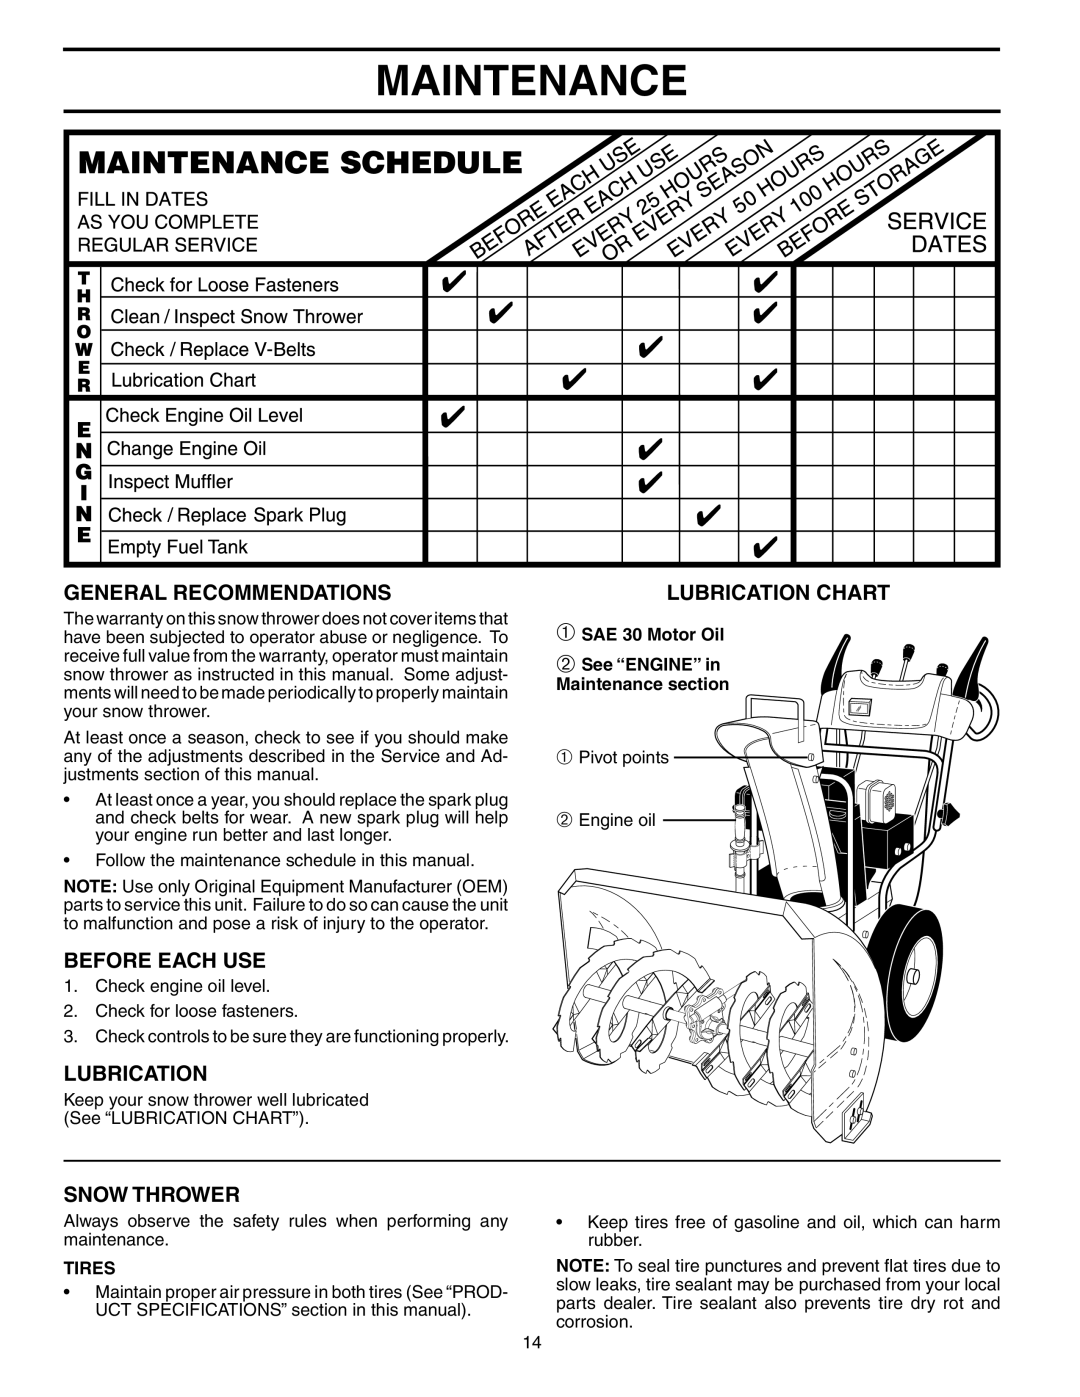 Husqvarna 10527STE Maintenance, General Recommendations, Before Each Use, Snow Thrower, Lubrication Chart, Tires 